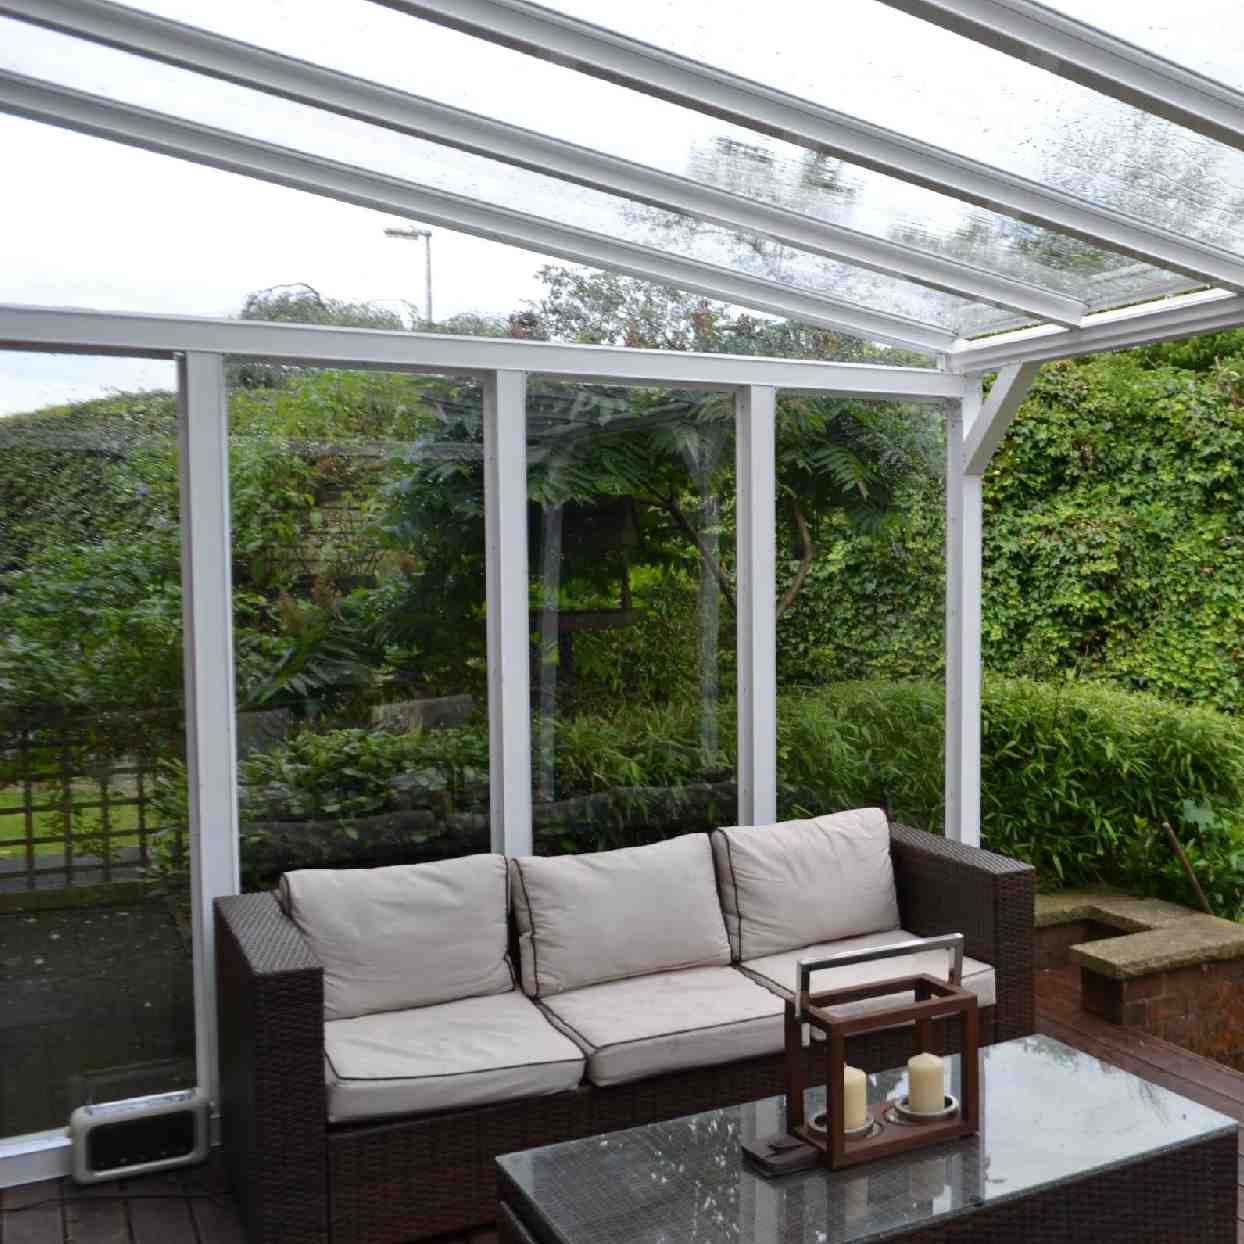 Buy Omega Verandah White with 16mm Polycarbonate Glazing - 9.5m (W) x 3.0m (P), (5) Supporting Posts online today